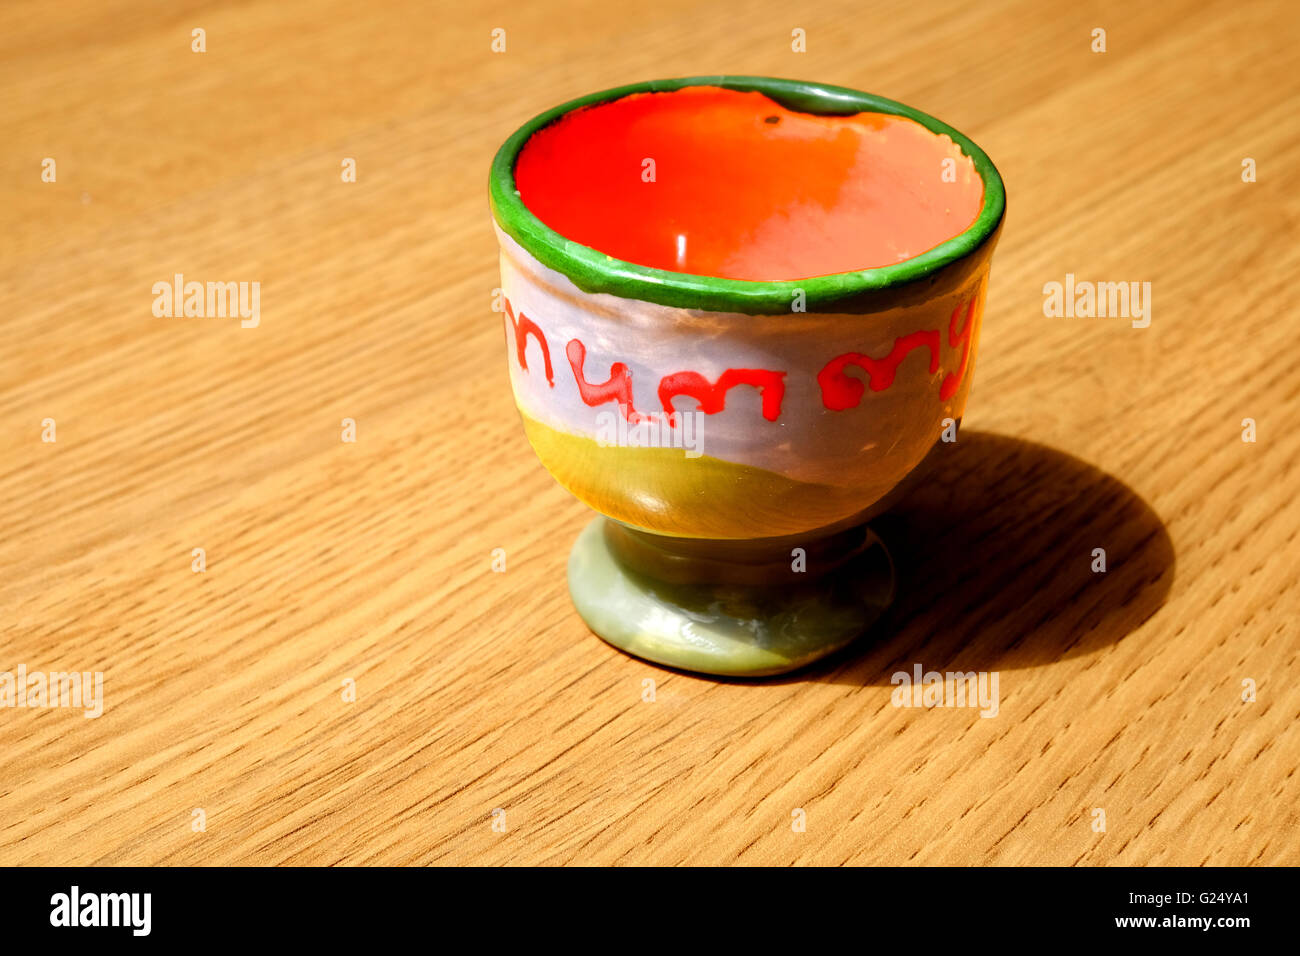 A home-made egg cup. Stock Photo